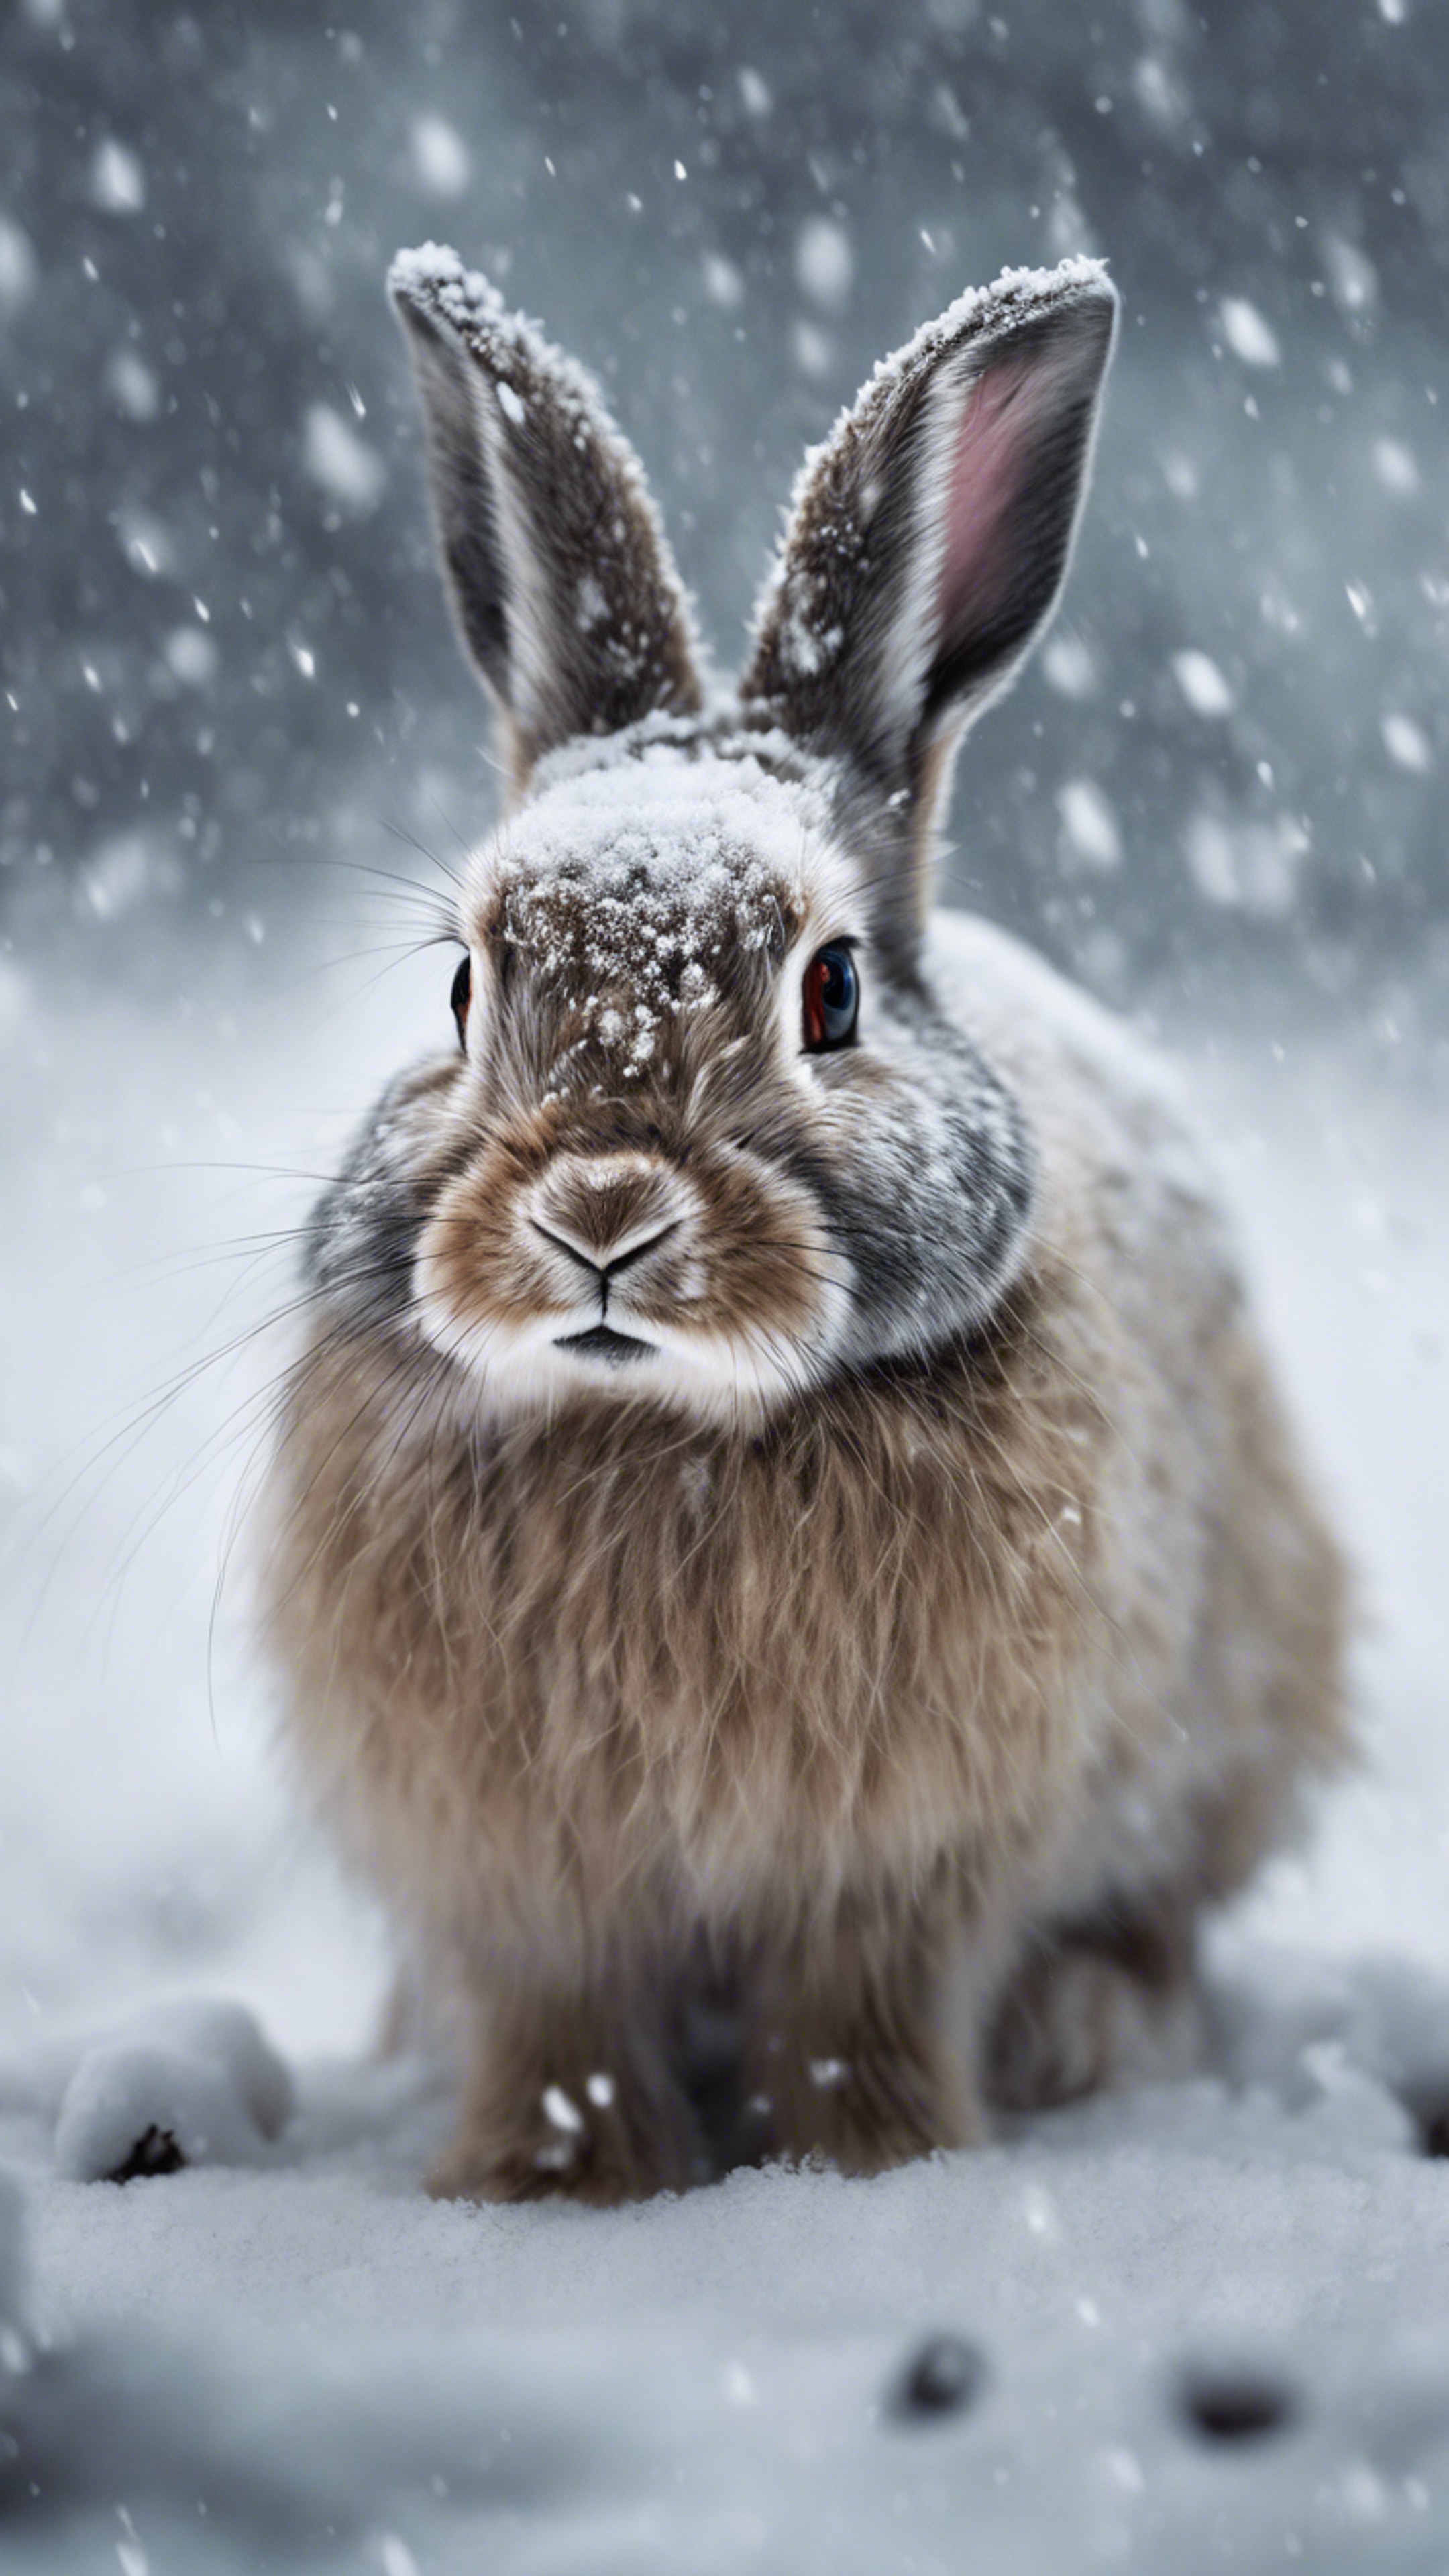 An Arctic rabbit braving a blizzard, its fur blending in with the snow. Tapetai[f8597e39ec4d4470ac43]